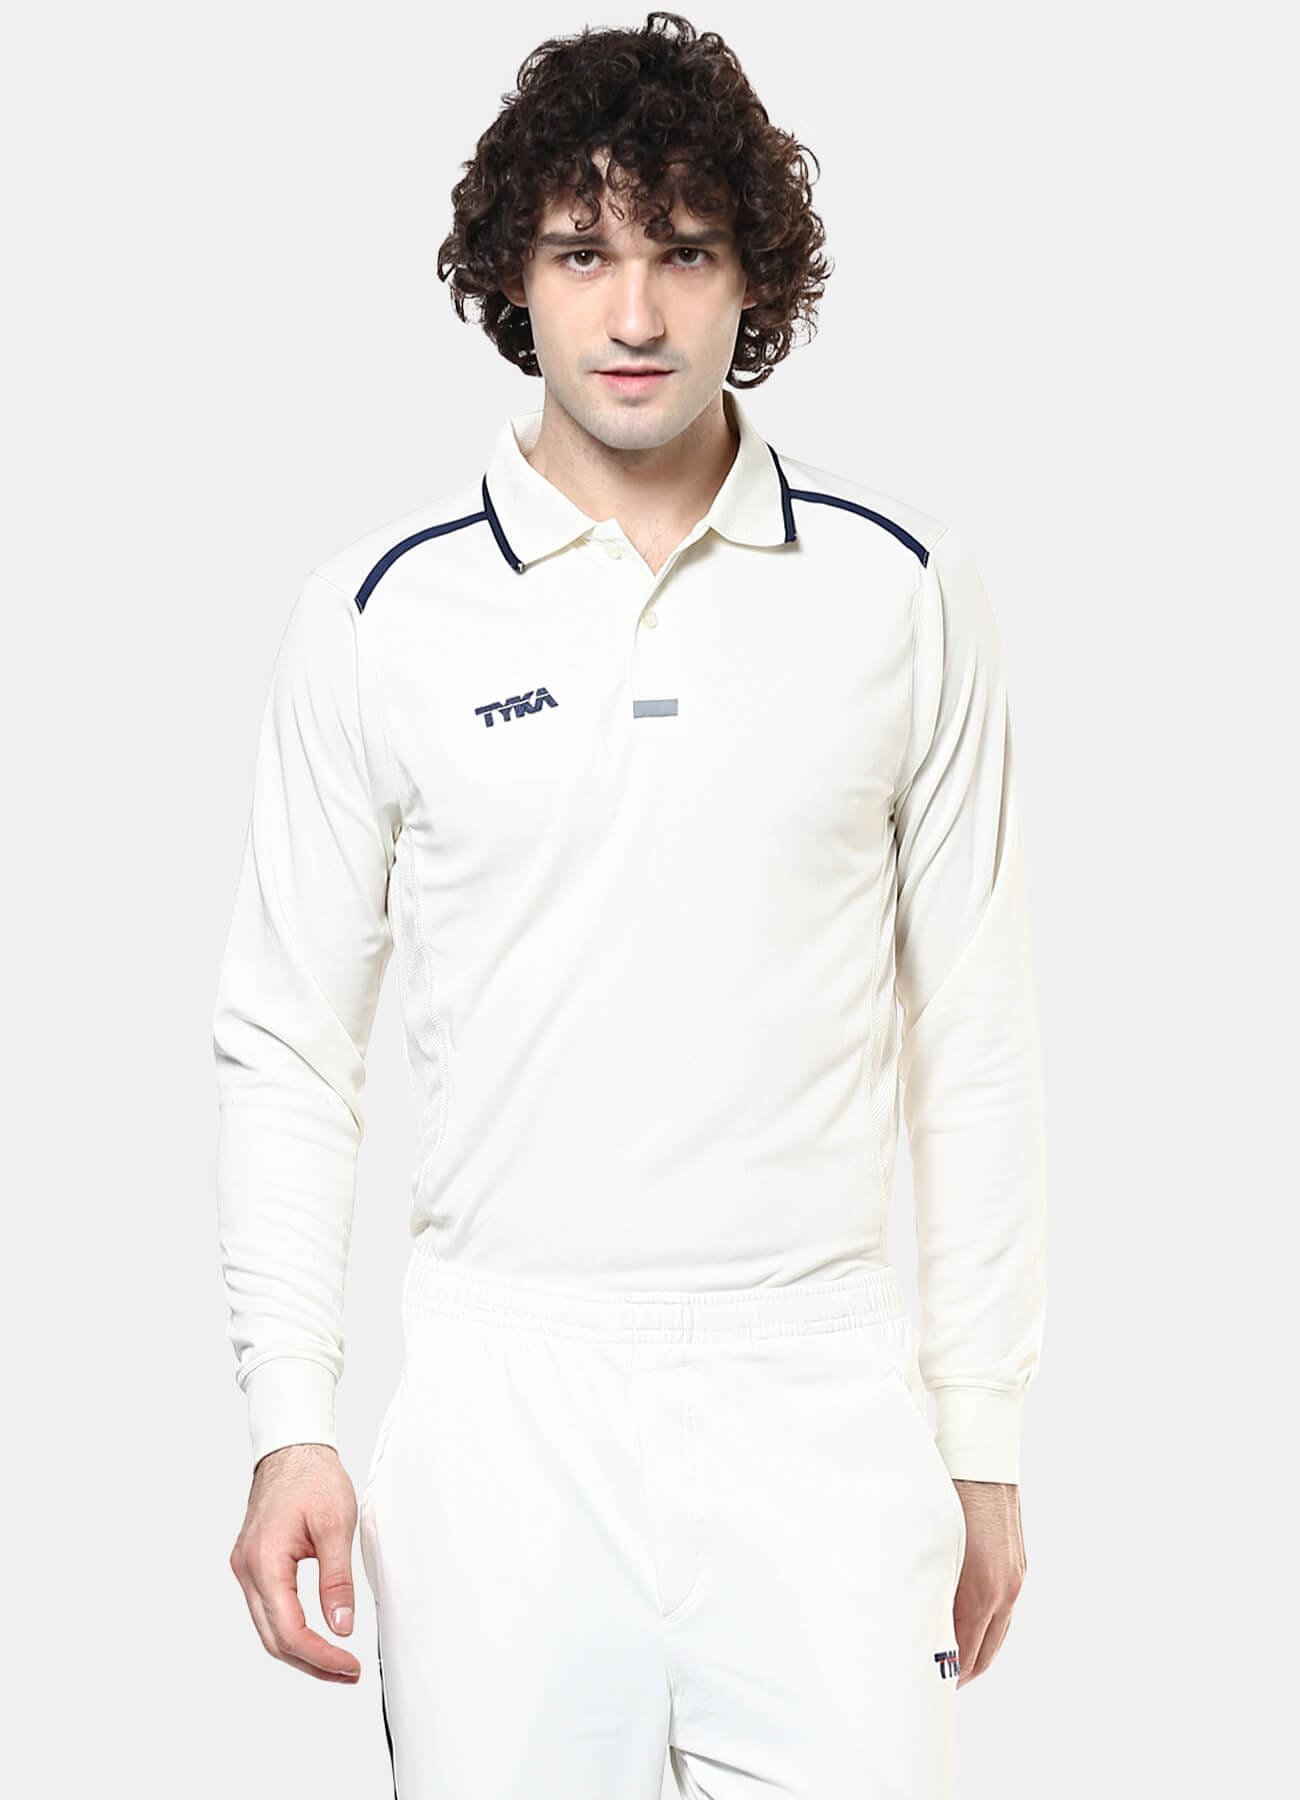 What Is The Best Fabric For Cricket Sportswear?